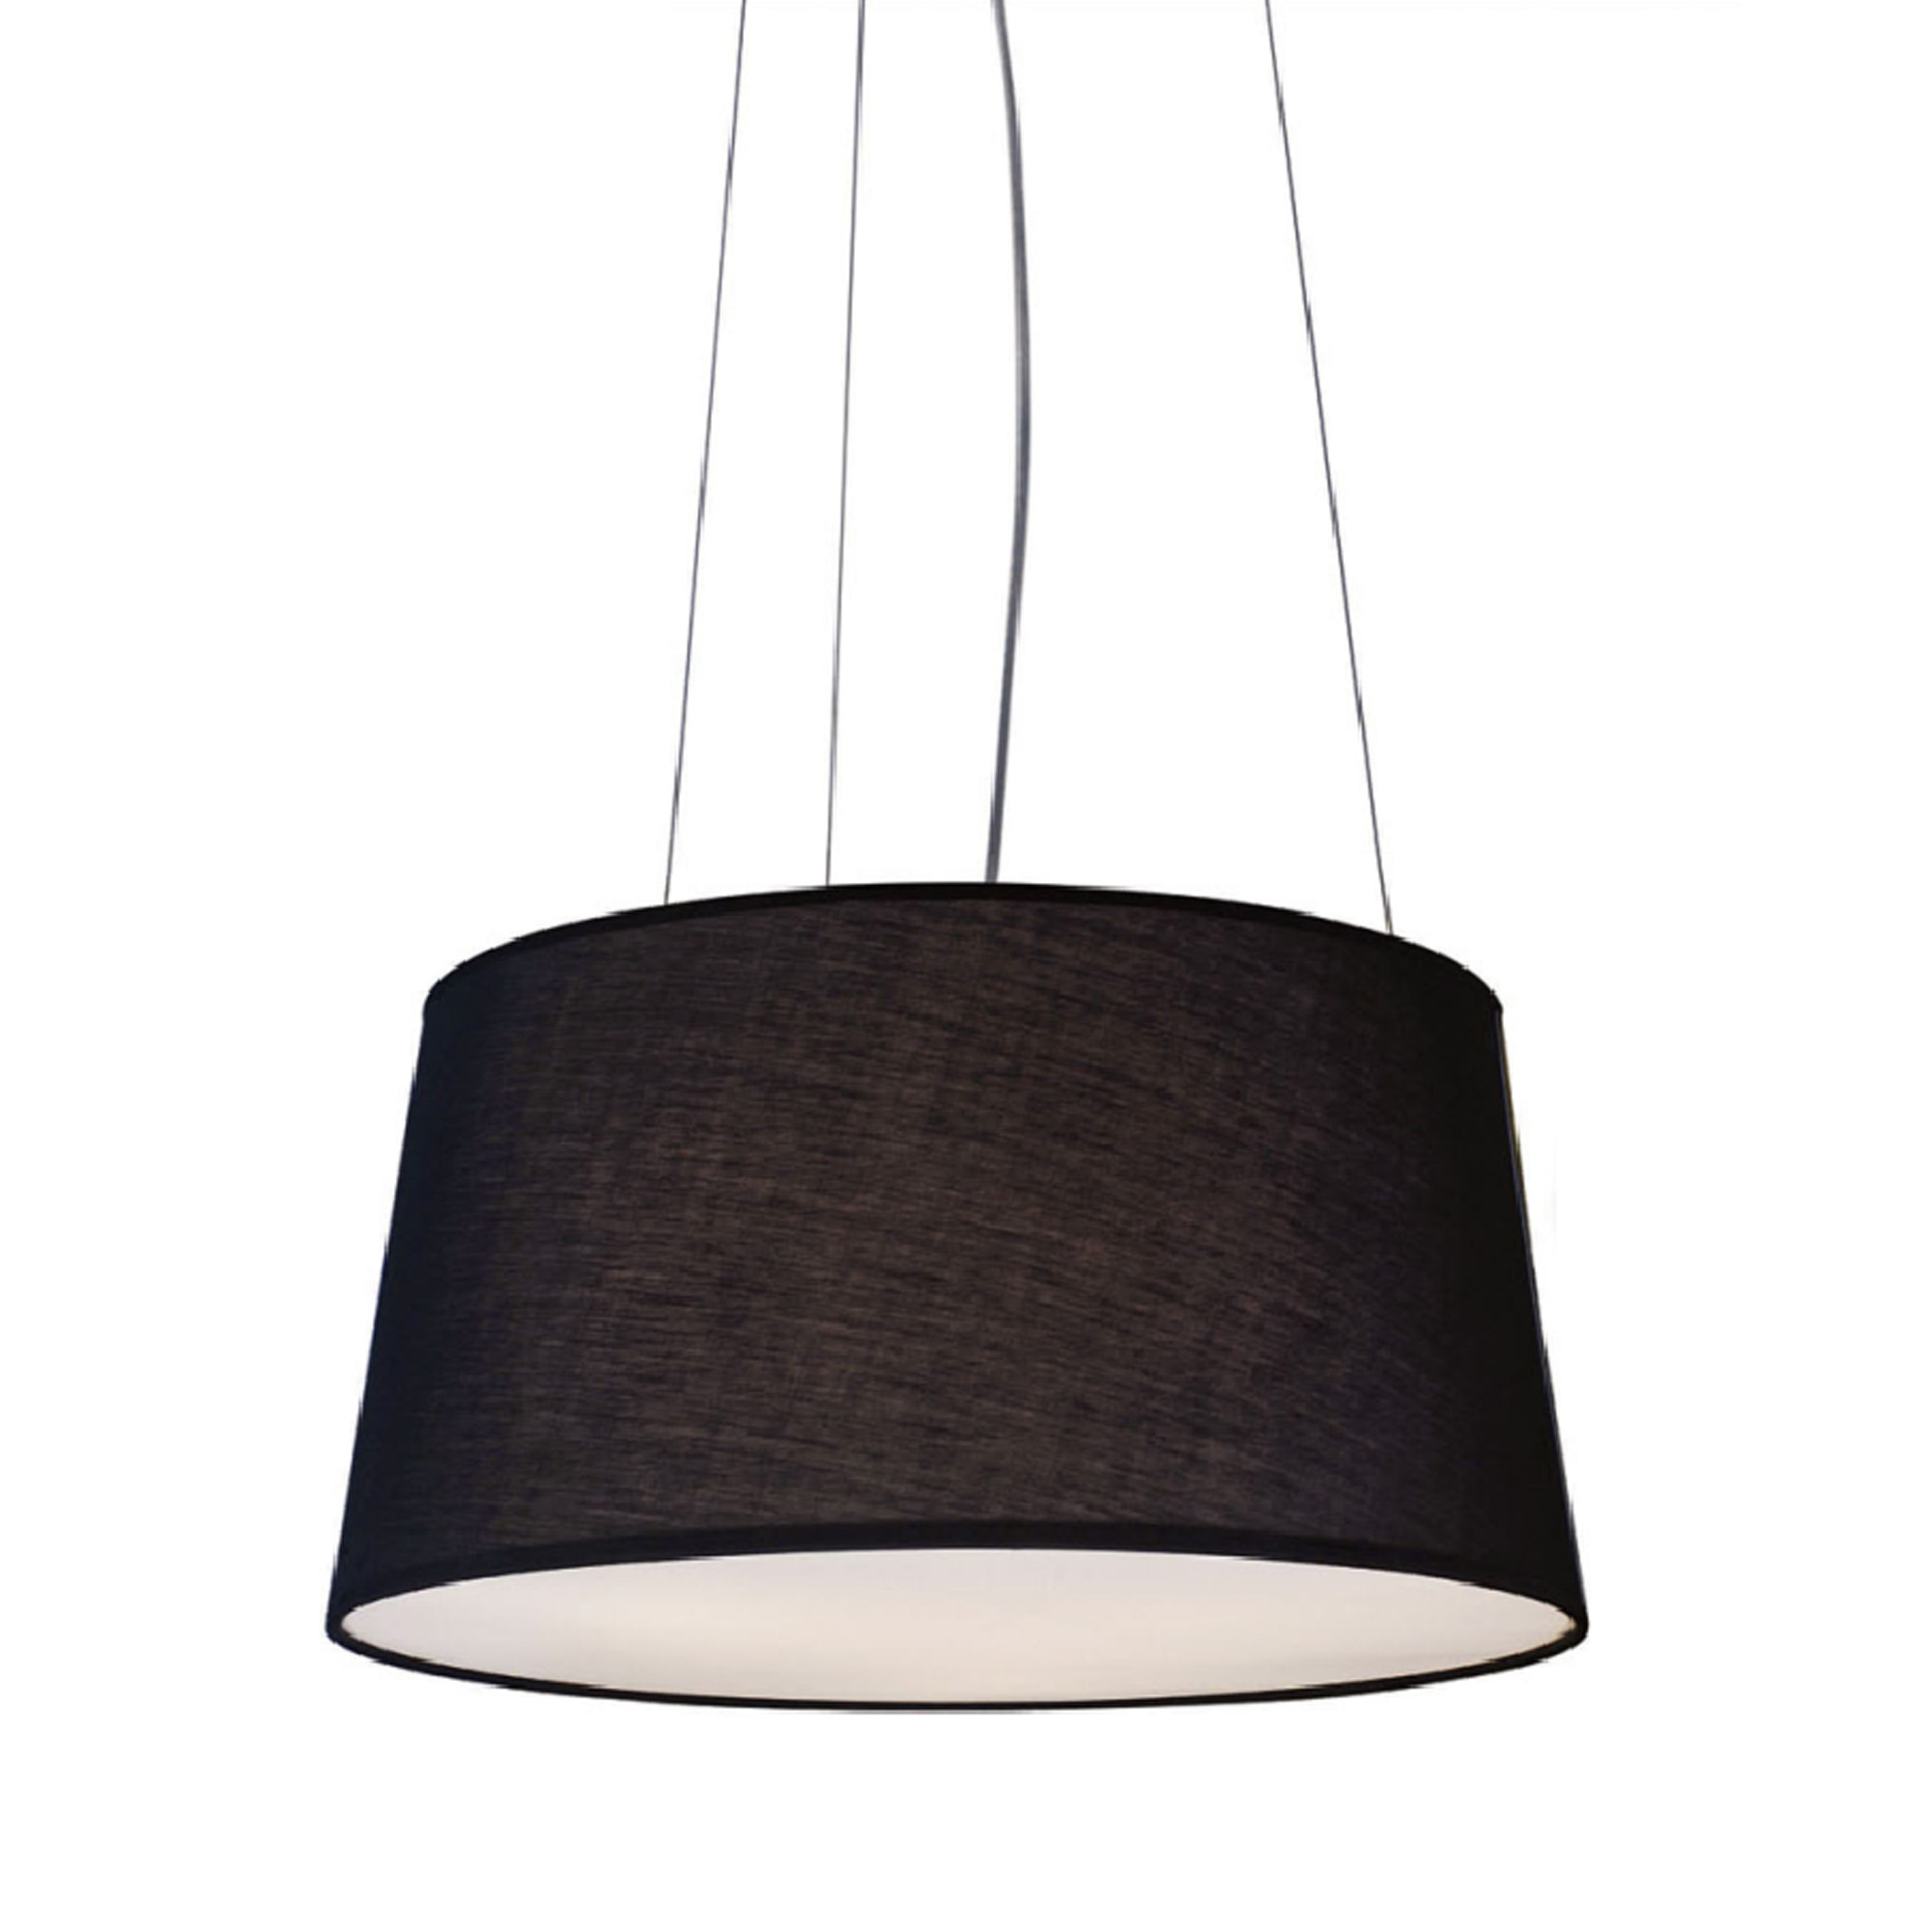 pendant lamp with black gauze shade DP174-BK-1.pendant lamp with black gauze shade DP174-BK     2.Best quality,competitive price and on time delivery     3.Suitable to hotel,conference room and amusement. modern appearance ,suitable for decorative   4.High quality and Durability